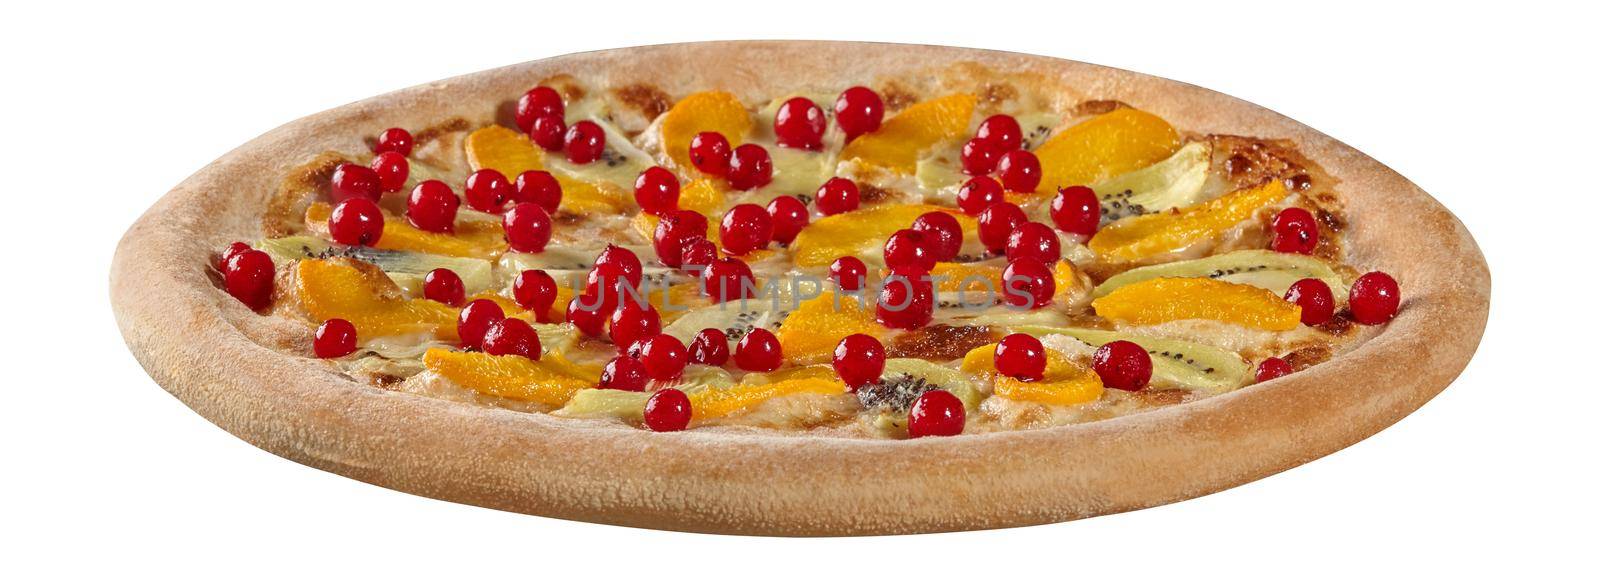 Fruit pizza with cream cheese sauce, condensed milk, peaches, kiwi and red currants by nazarovsergey